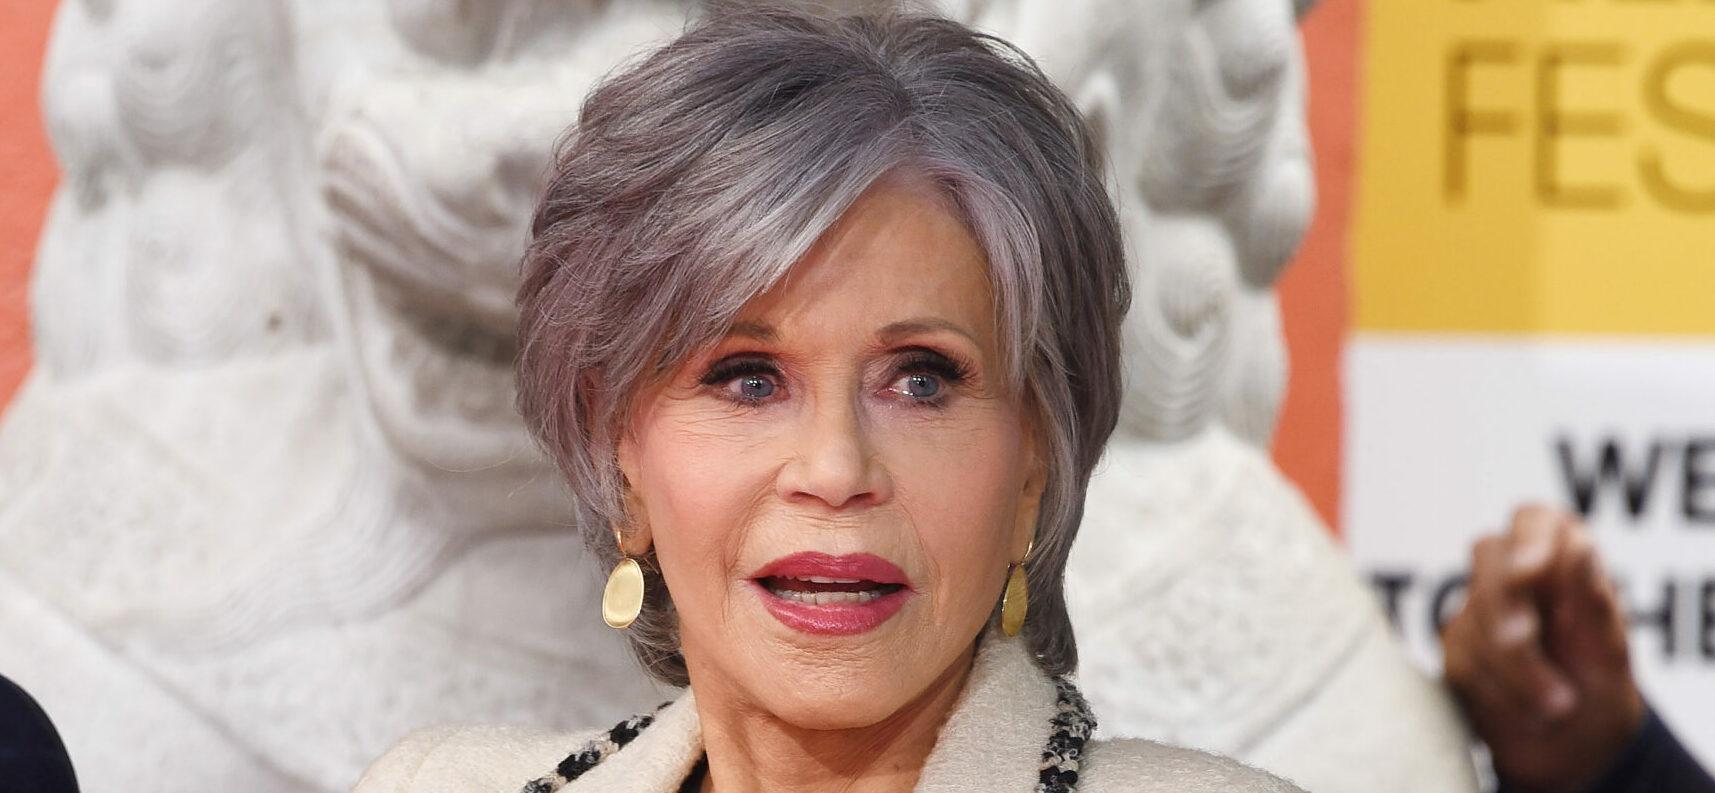 Jane Fonda Opens Up About Her Biggest Regret And How She’s Trying To Make Amends